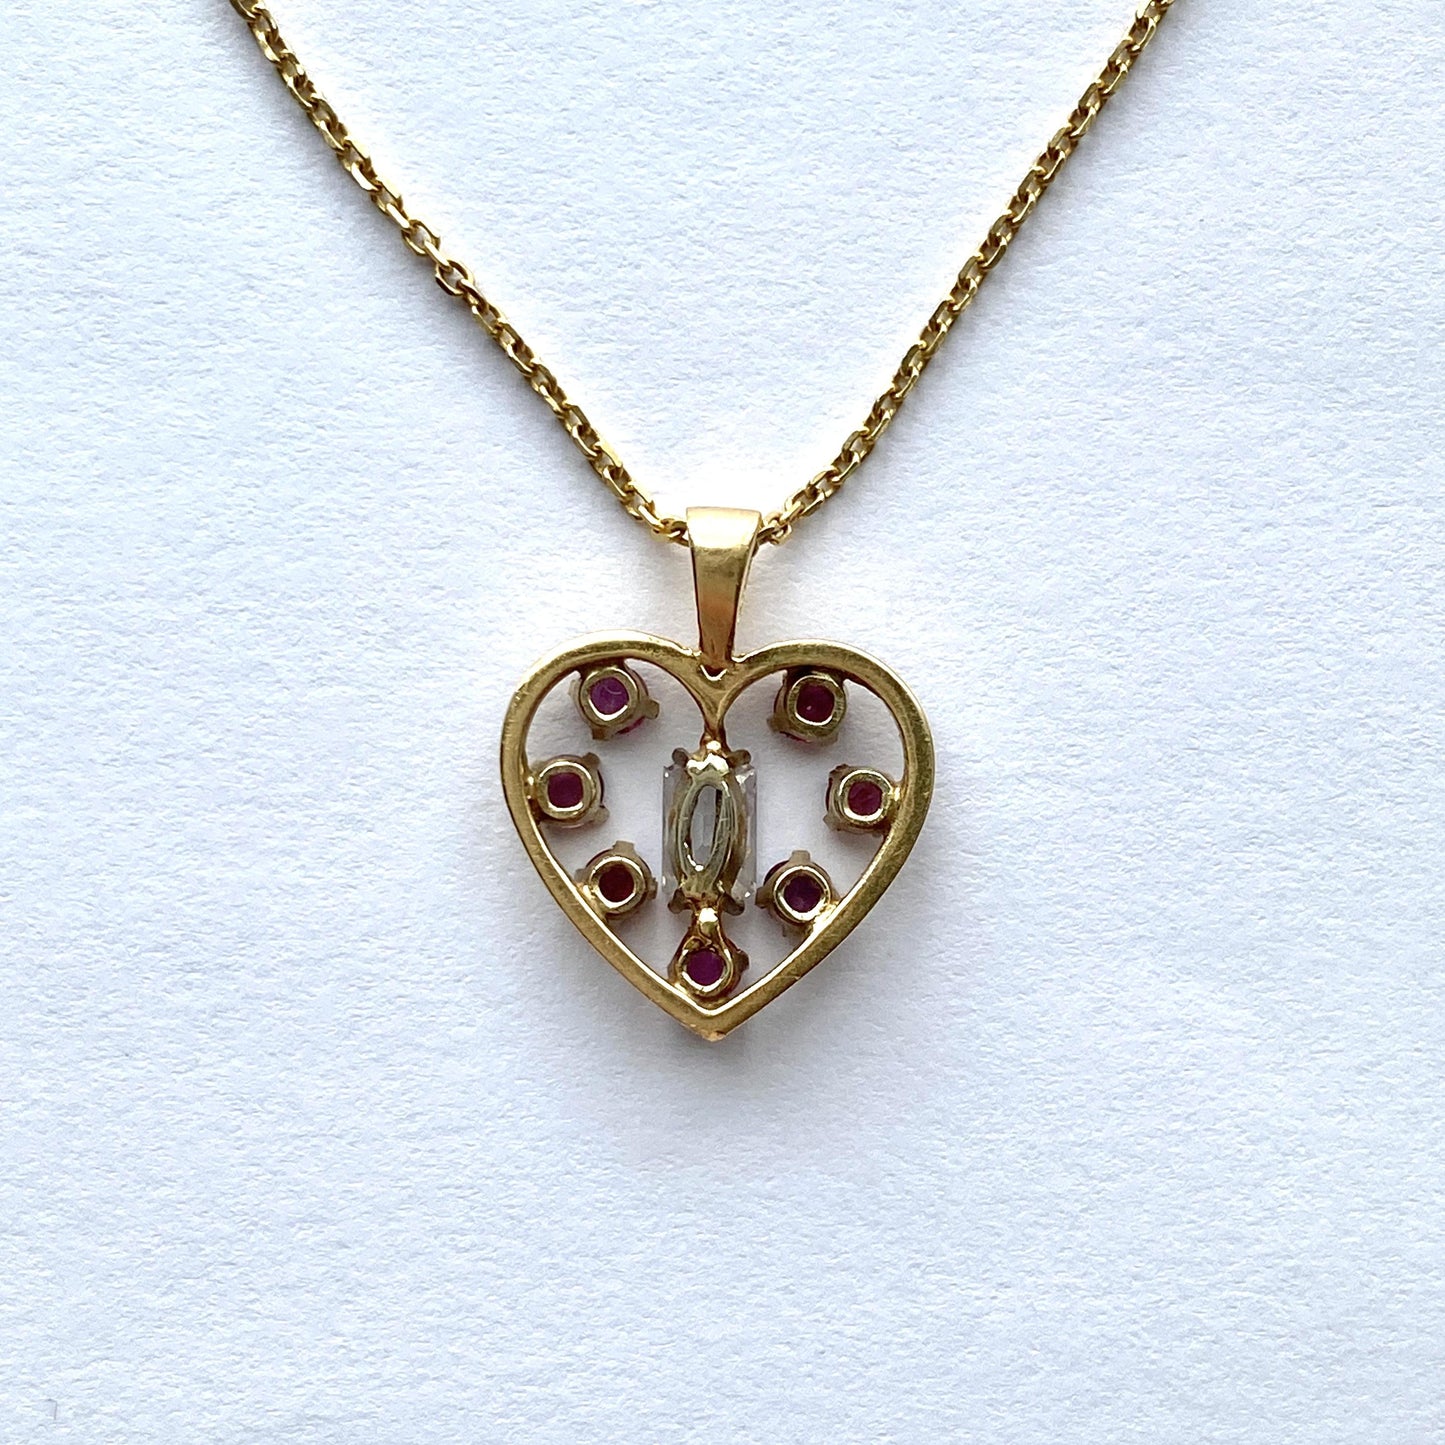 0.60ctw Heart Necklace Diamond & Ruby 14K Yellow Gold 4.0G